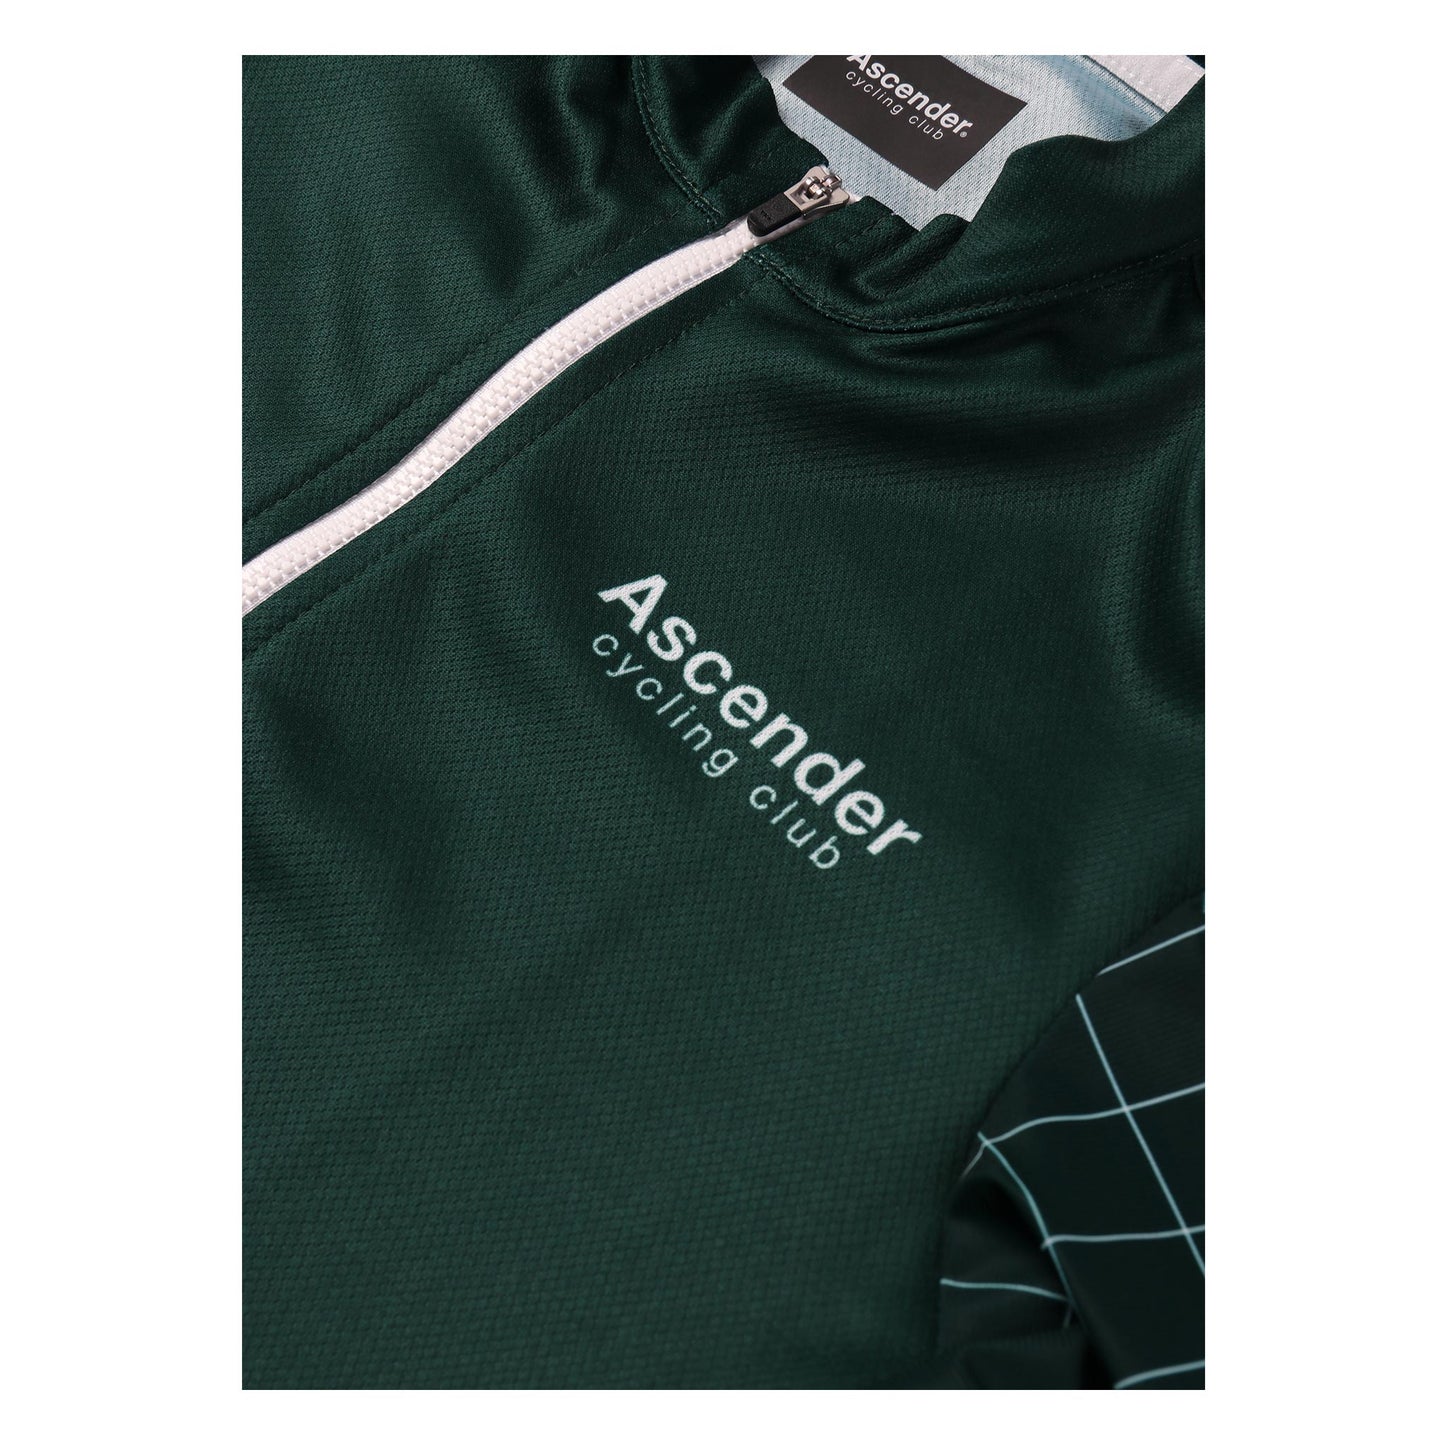 Supernova Sustainable Short Sleeves Cycling Jersey Green from Ascender Cycling Club Zürich Switzerland Front Side Logo View